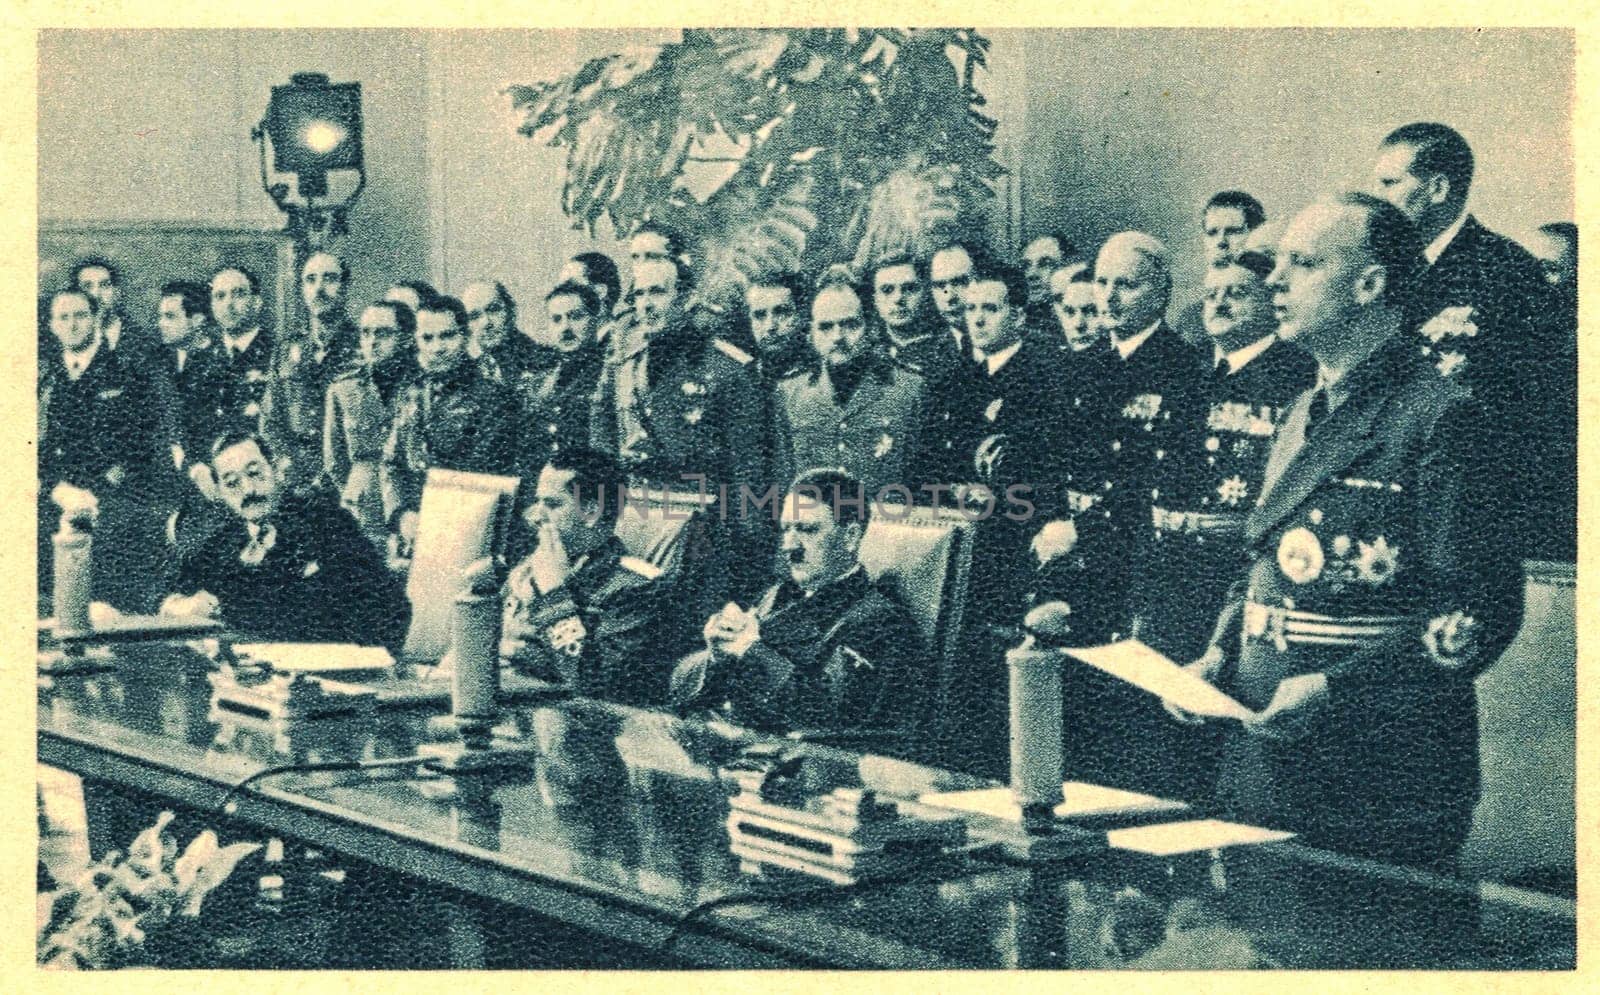 The Tripartite Pact, also known as the Berlin Pact, was an agreement between Germany, Italy and Japan signed in Berlin on 27 September 1940. Signing ceremony for the Axis Powers Tripartite Pact seated at front left left to right are Japan's Ambassador Sabur Kurusu leaning forward, Italy's Minister of Foreign Affairs Galeazzo Ciano and Germany's Fuhrer Adolf Hitler slumping in his chair . by roman_nerud